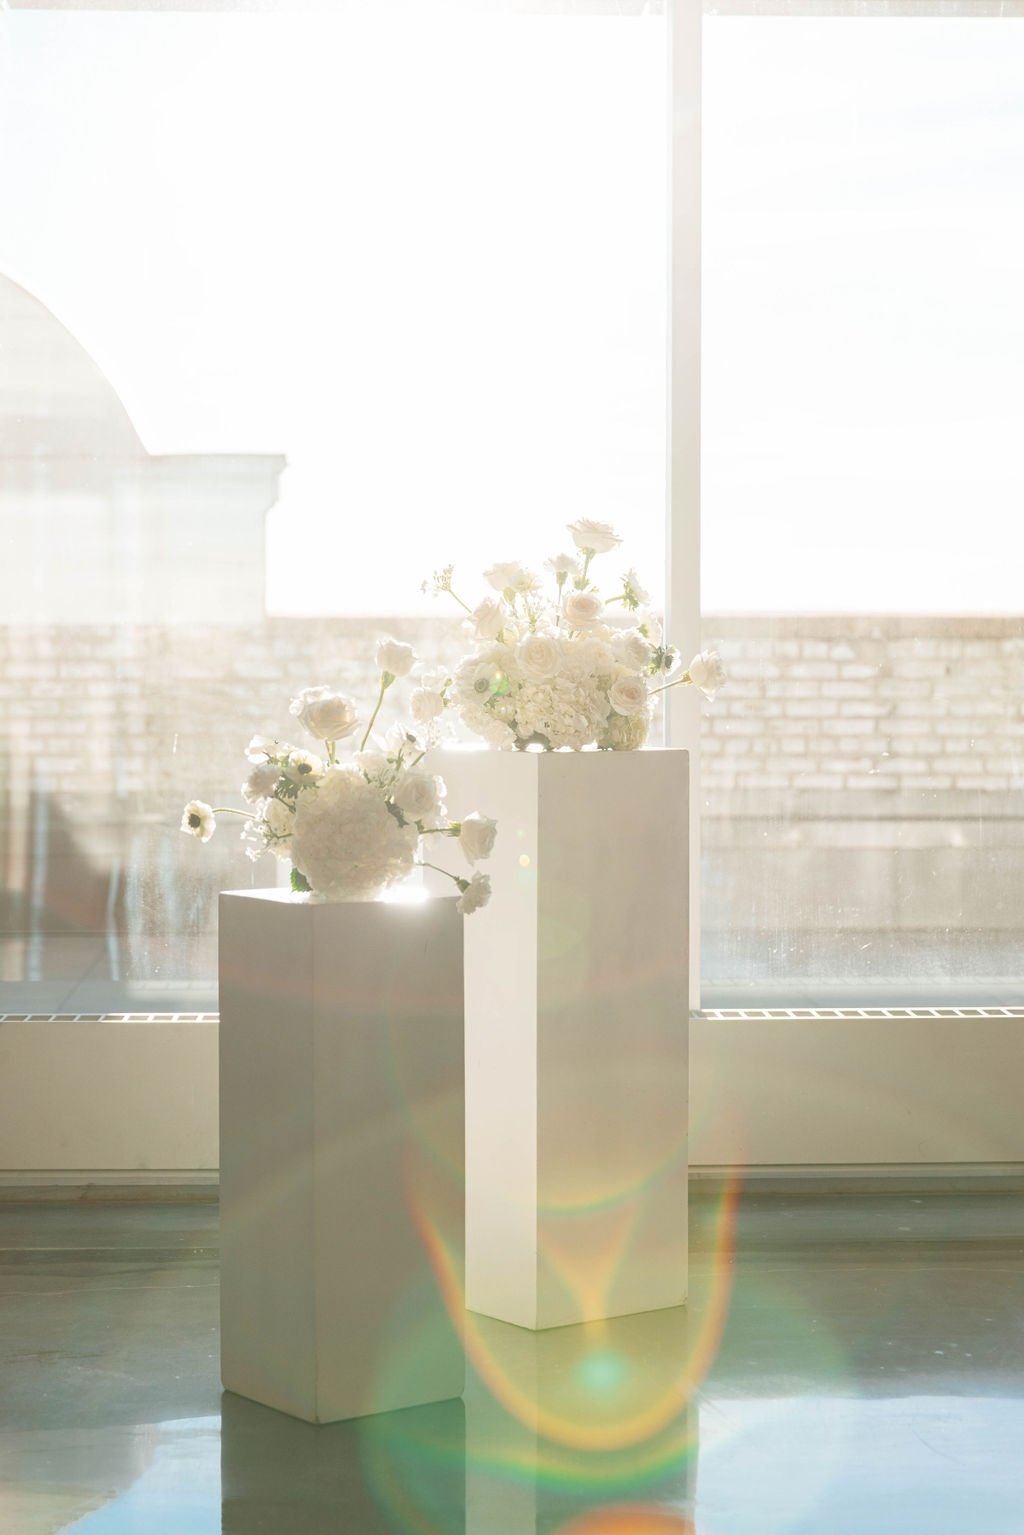 The white flowers look stunning on these uneven podiums. The light coming in from the south facing windows creates such a warm atmosphere and really makes this arrangement stand out.
.
. #yegweddingvenue #yegwedding #wedding #venue #romanticwedding #